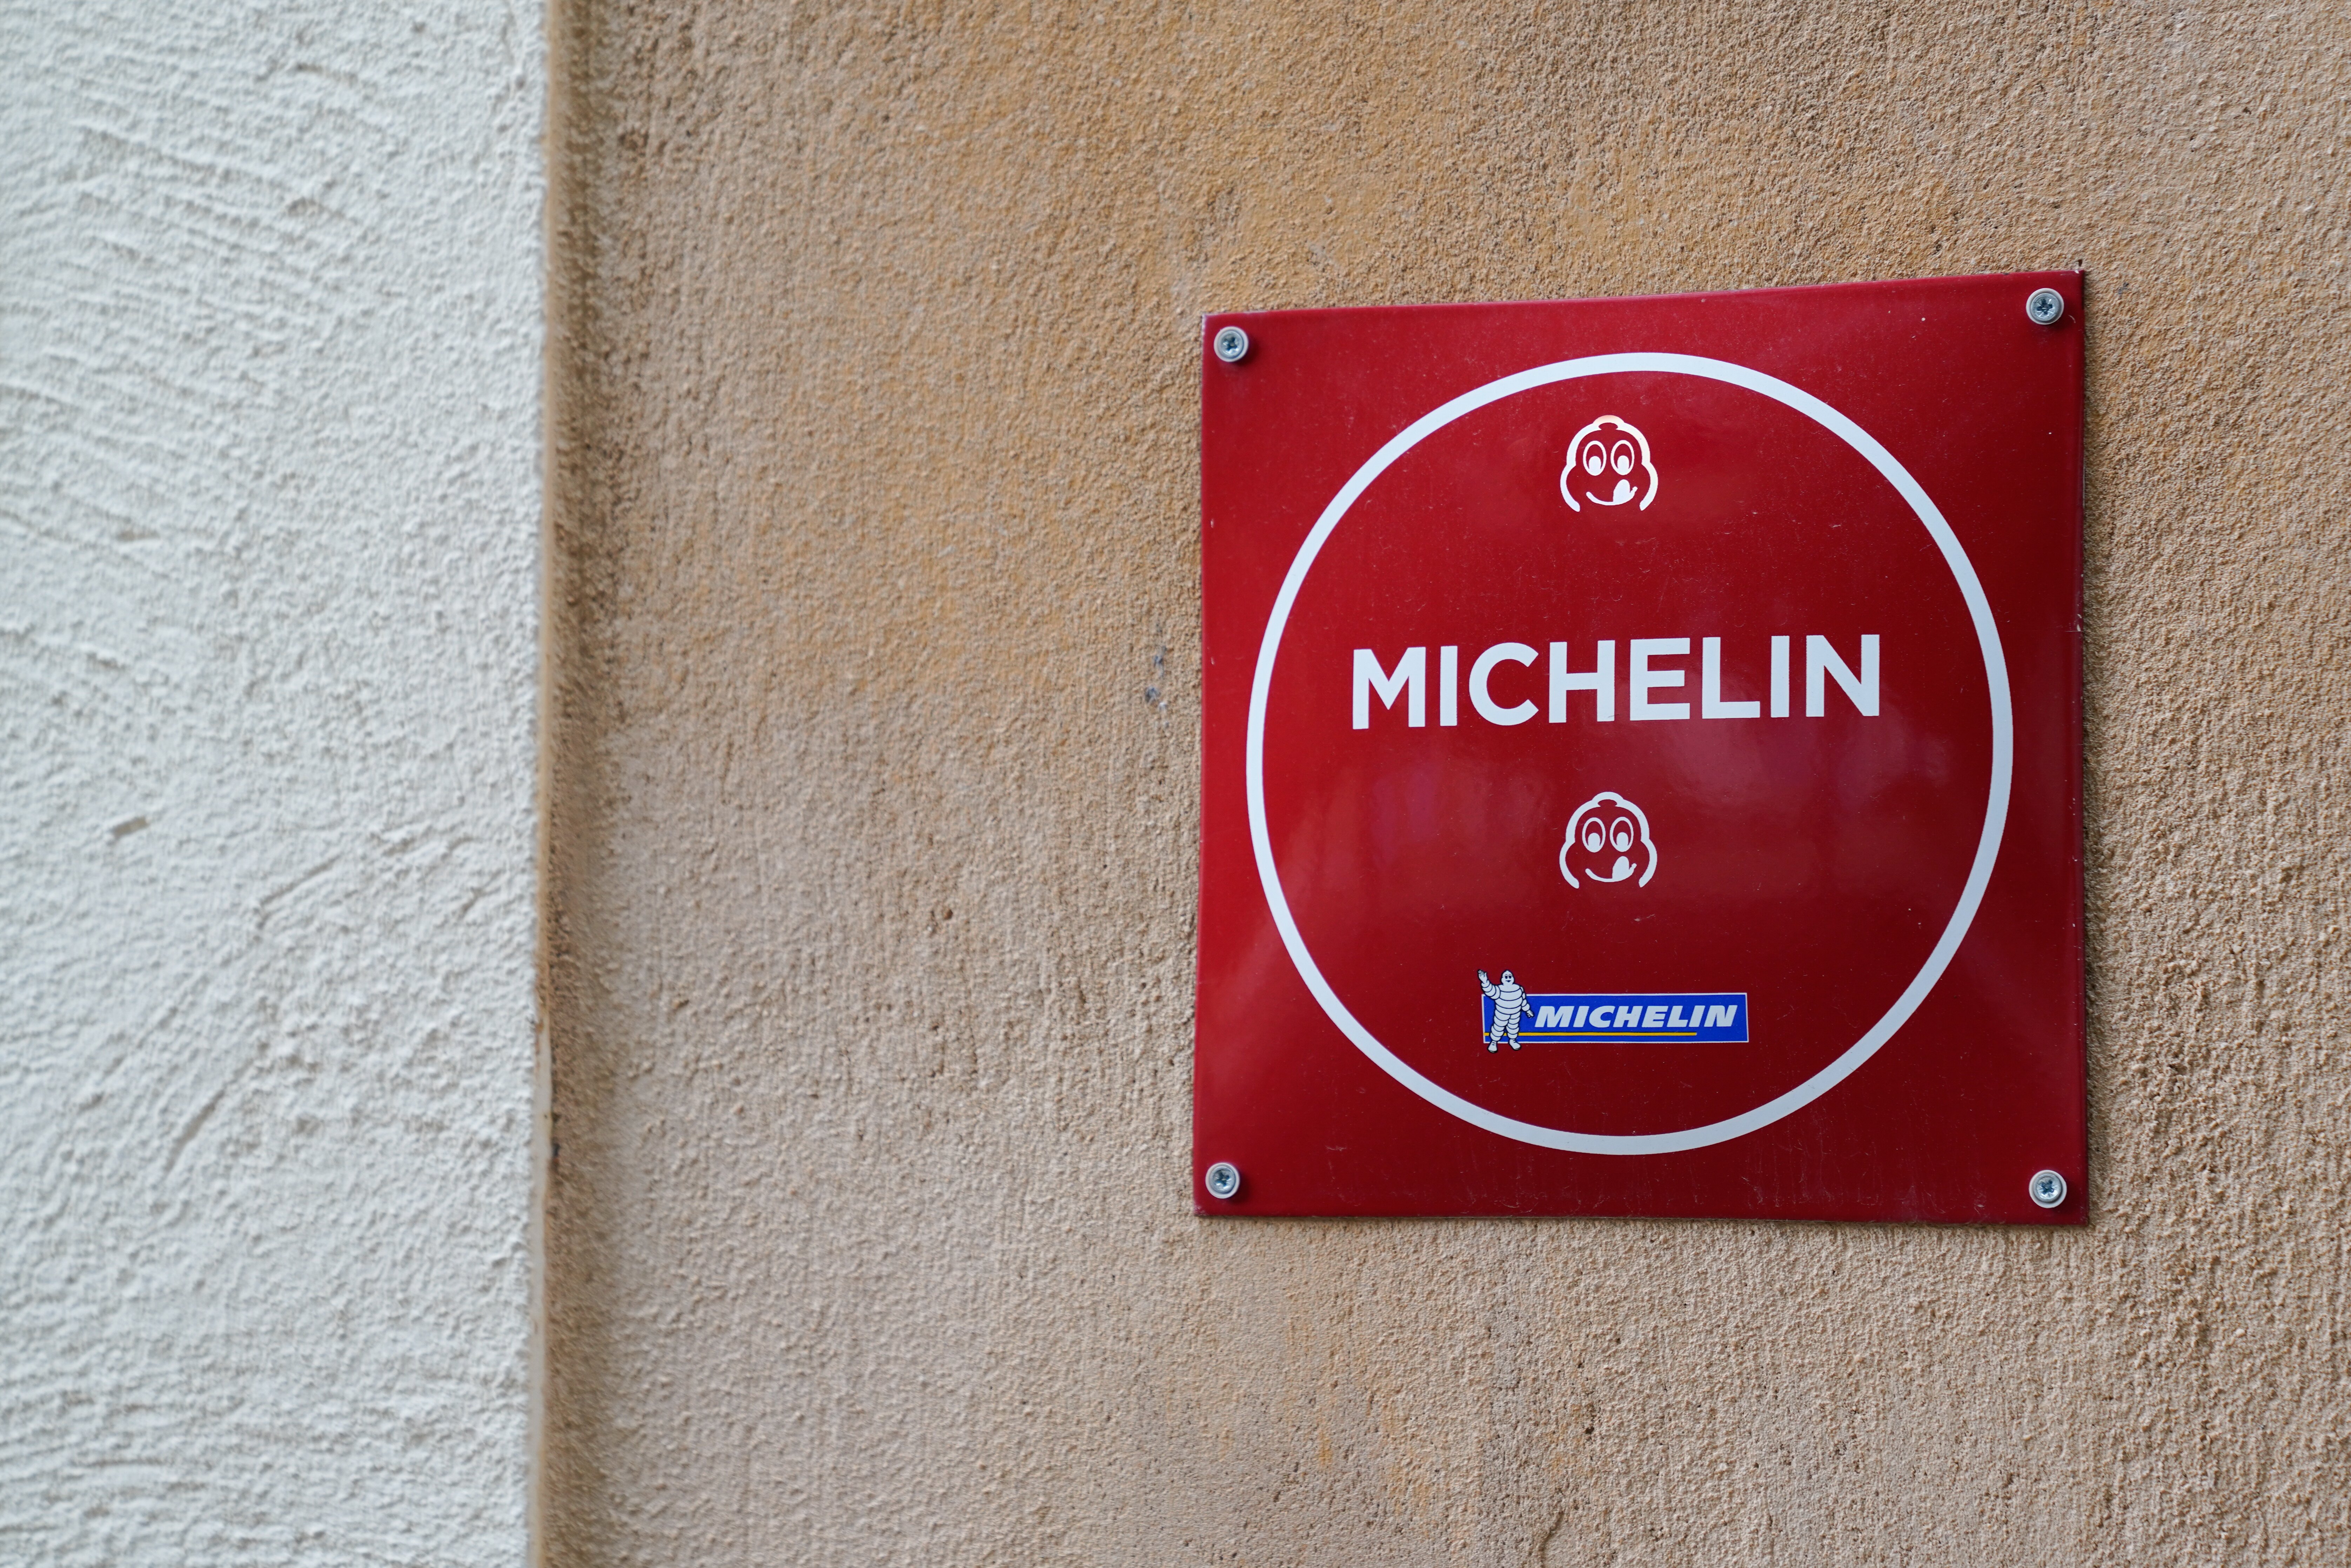 Michelin reveals new Bib Gourmands for 2023 guide